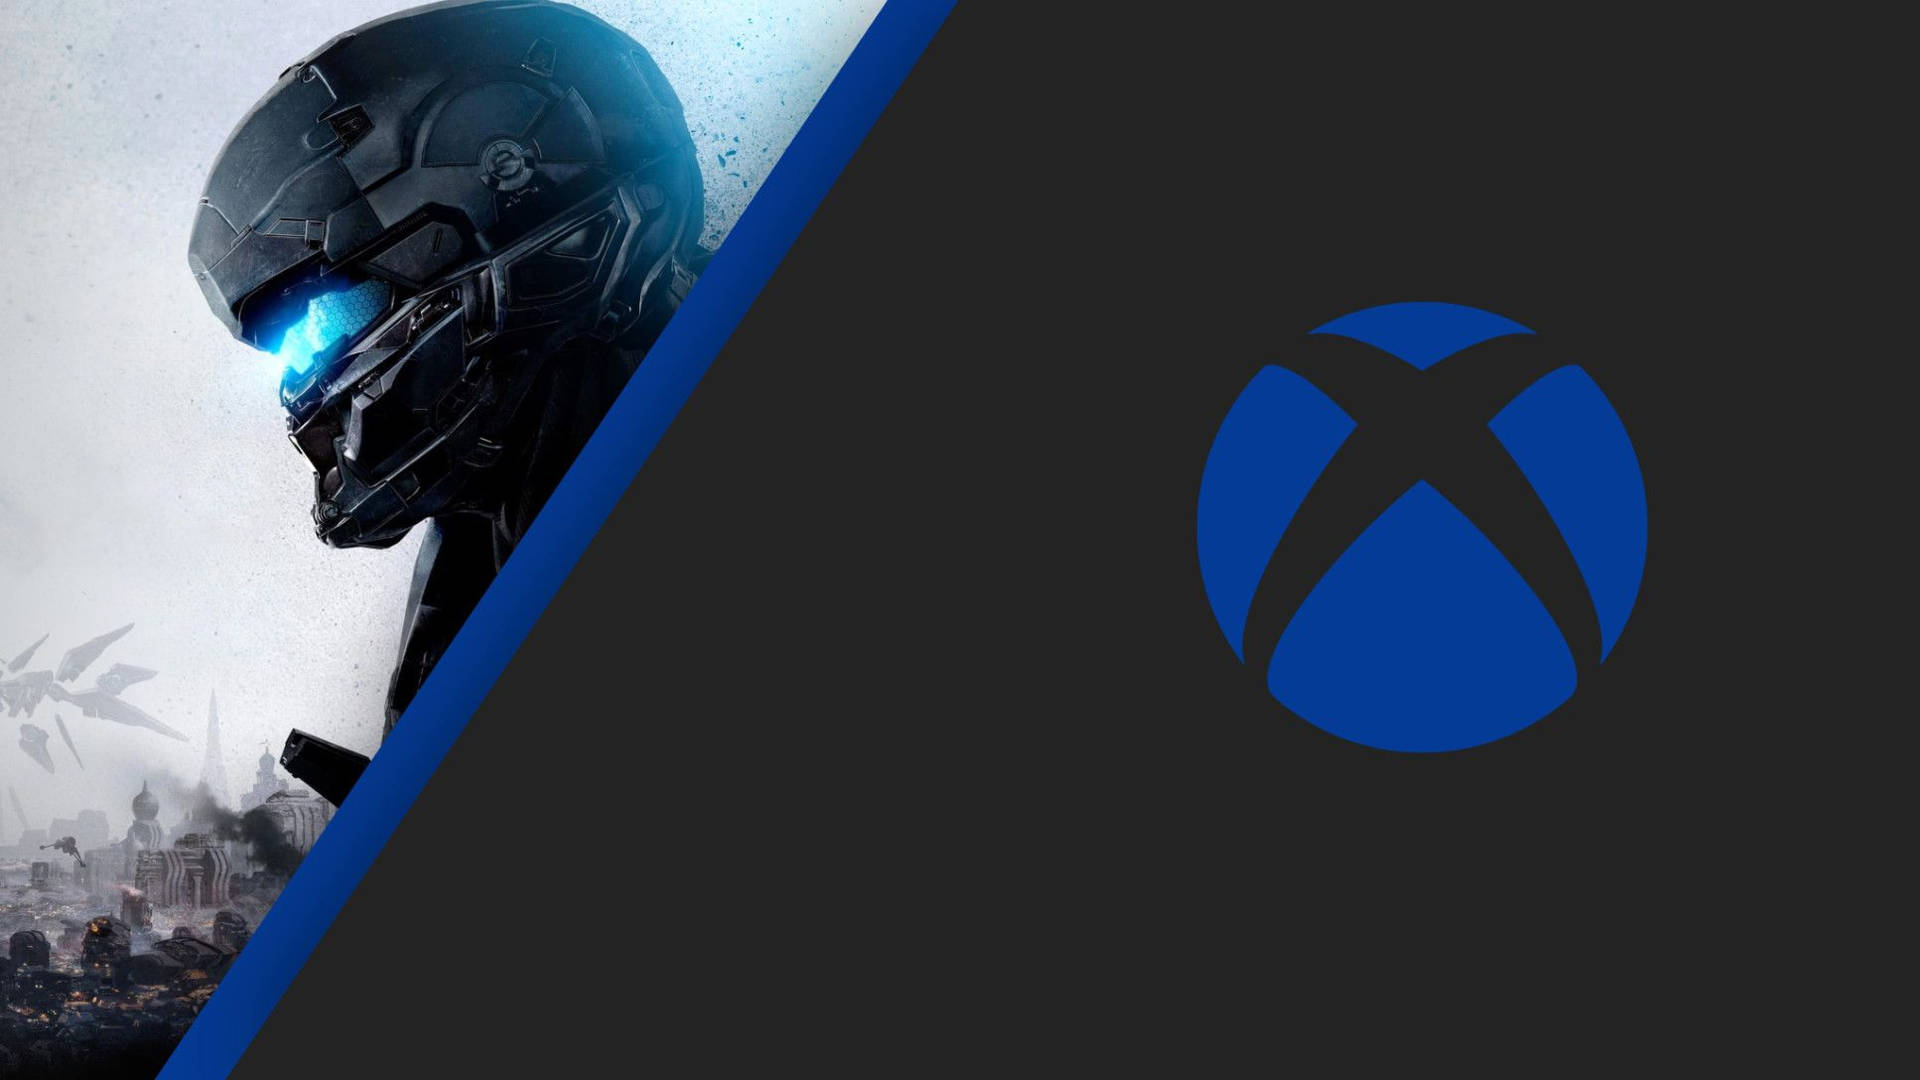 Xbox One X Halo 5 Guardians Limited Edition Vægtapet Wallpaper